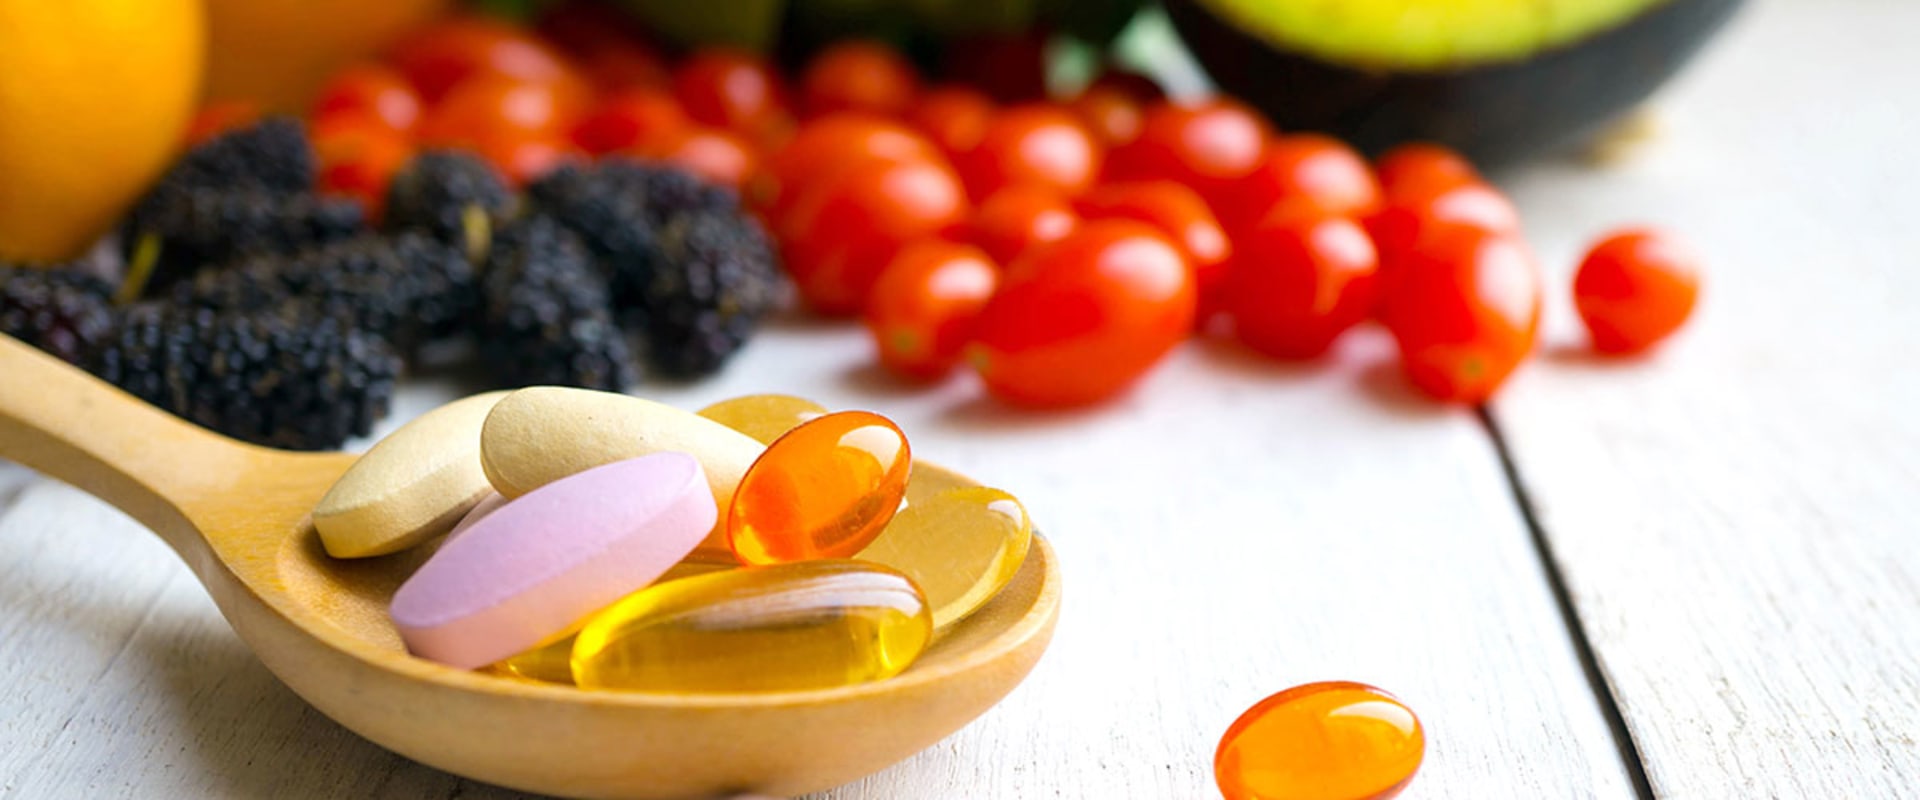 Is it Safe to Take Vitamin Supplements Daily? - An Expert's Perspective